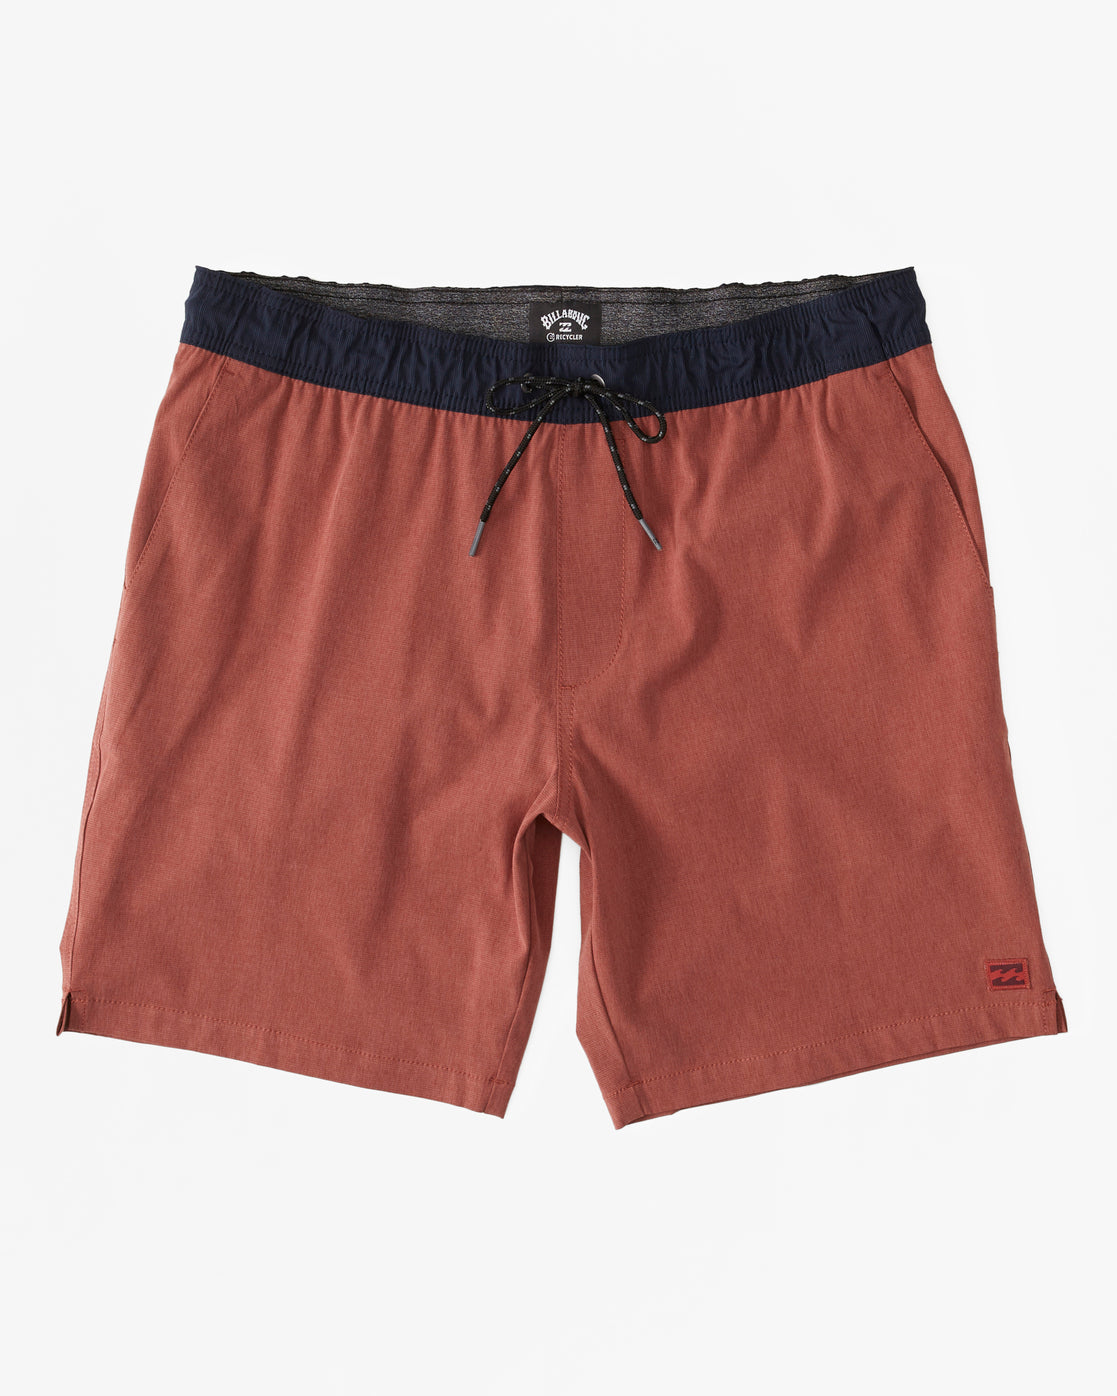 Crossfire Elastic Submersible Shorts 18" - Dusty Red